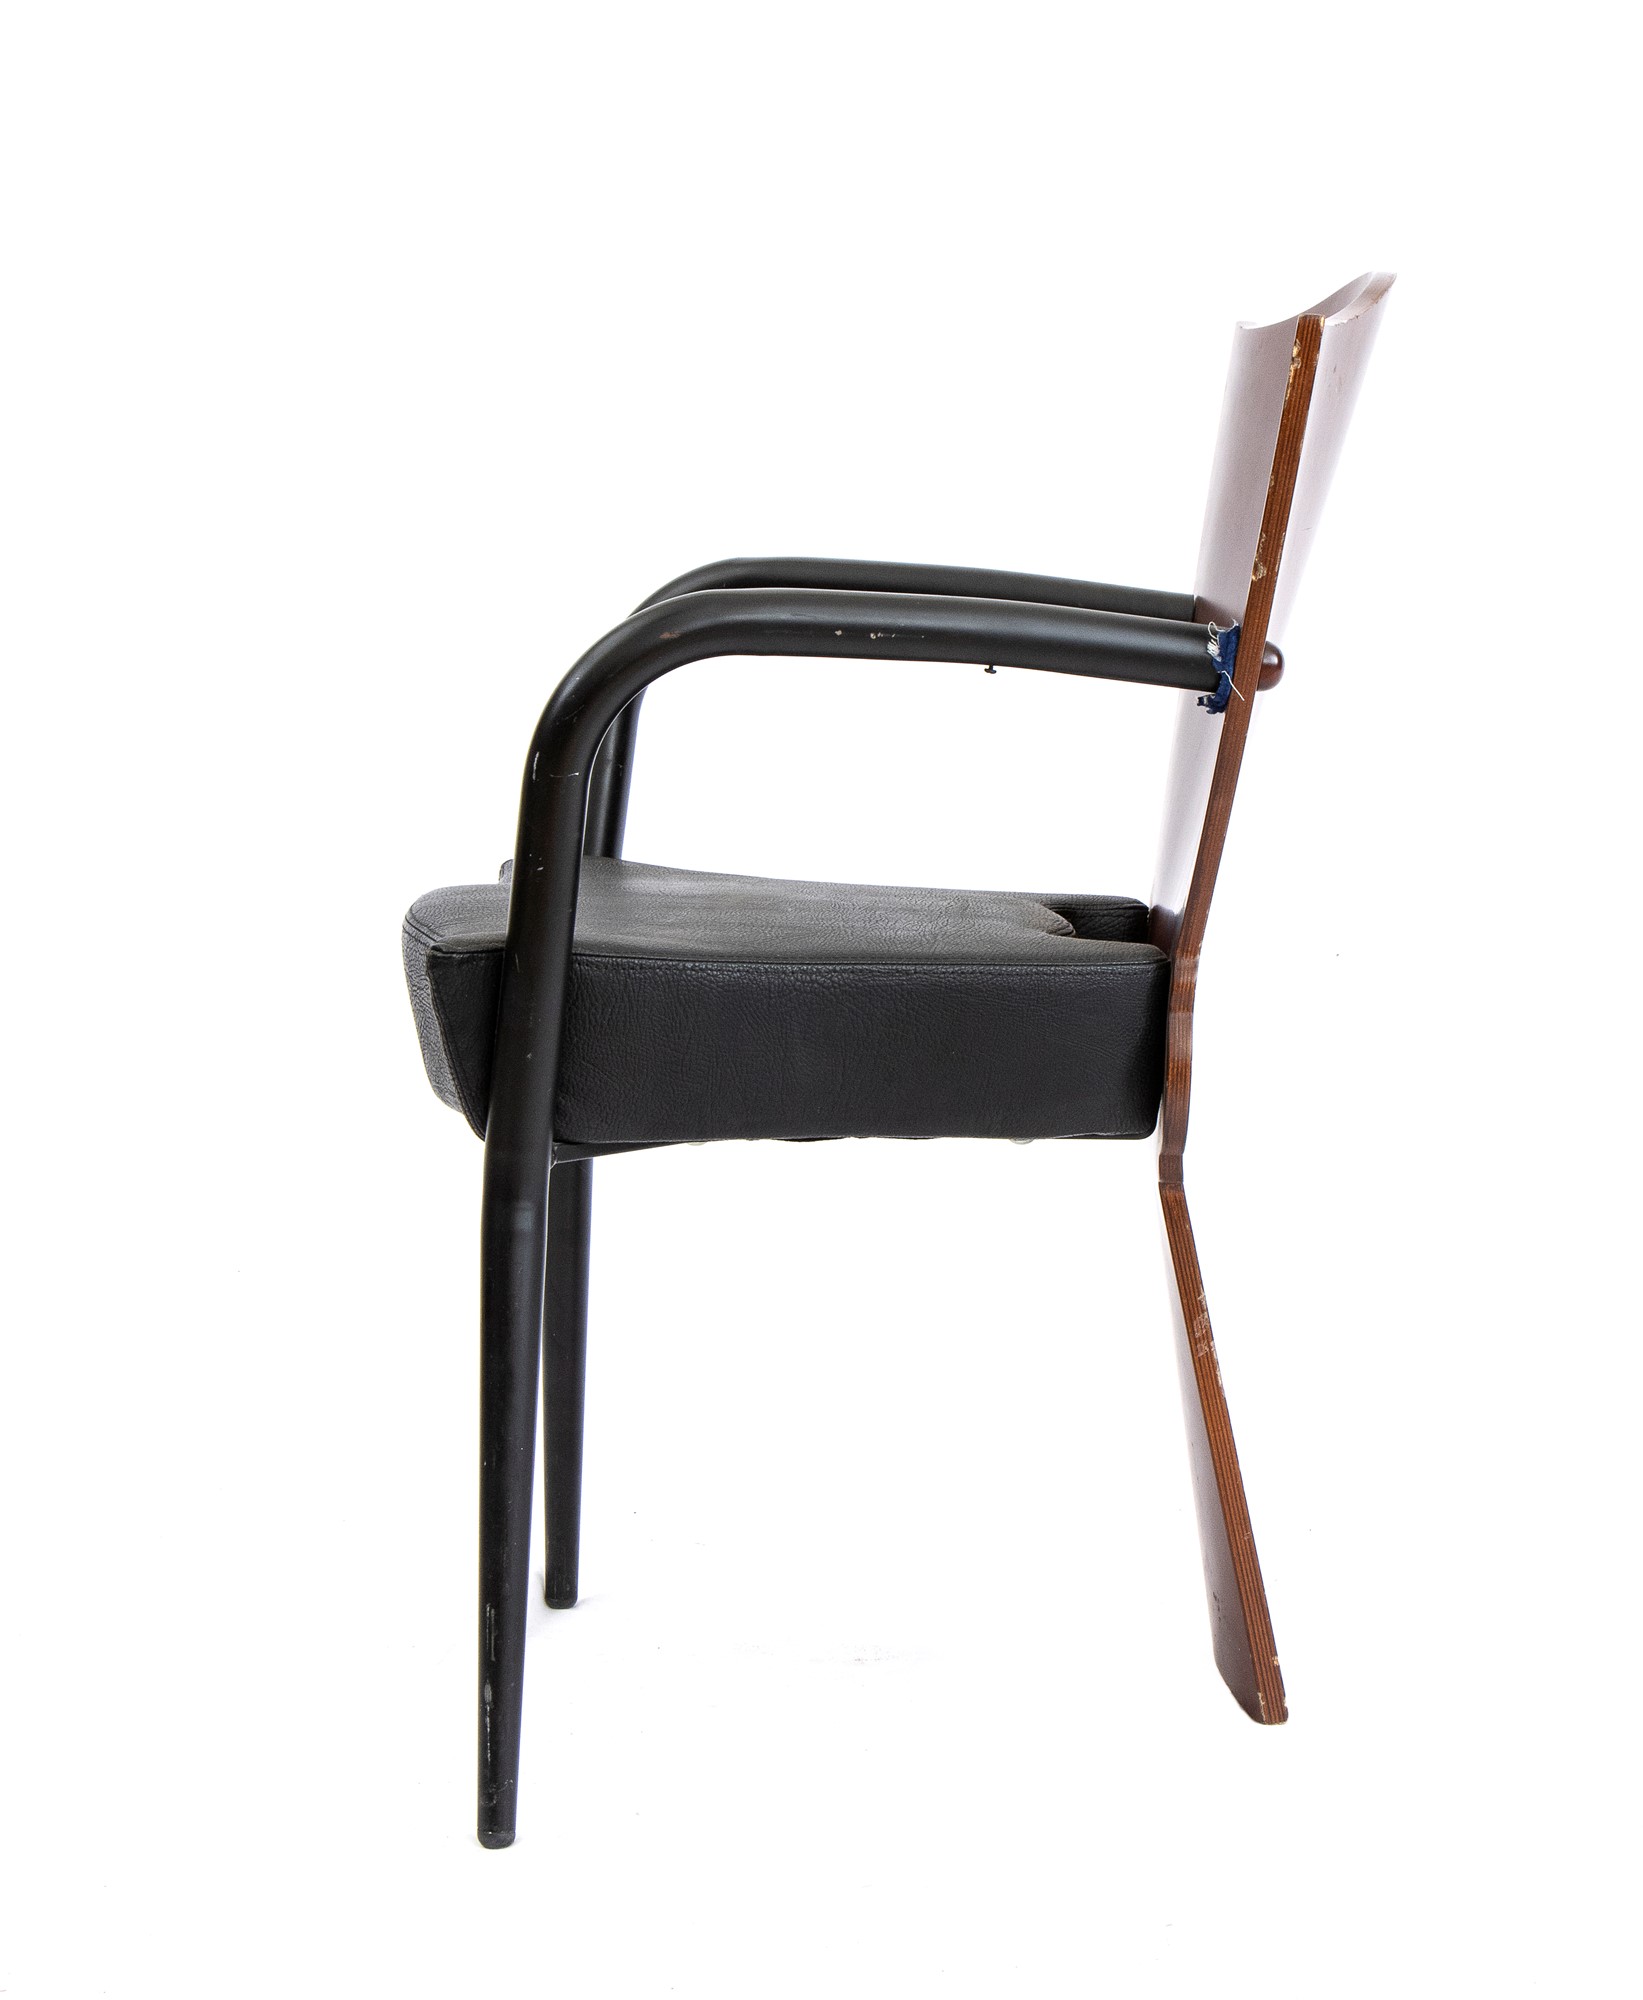 Four chairs mod. Dalami - Image 13 of 15